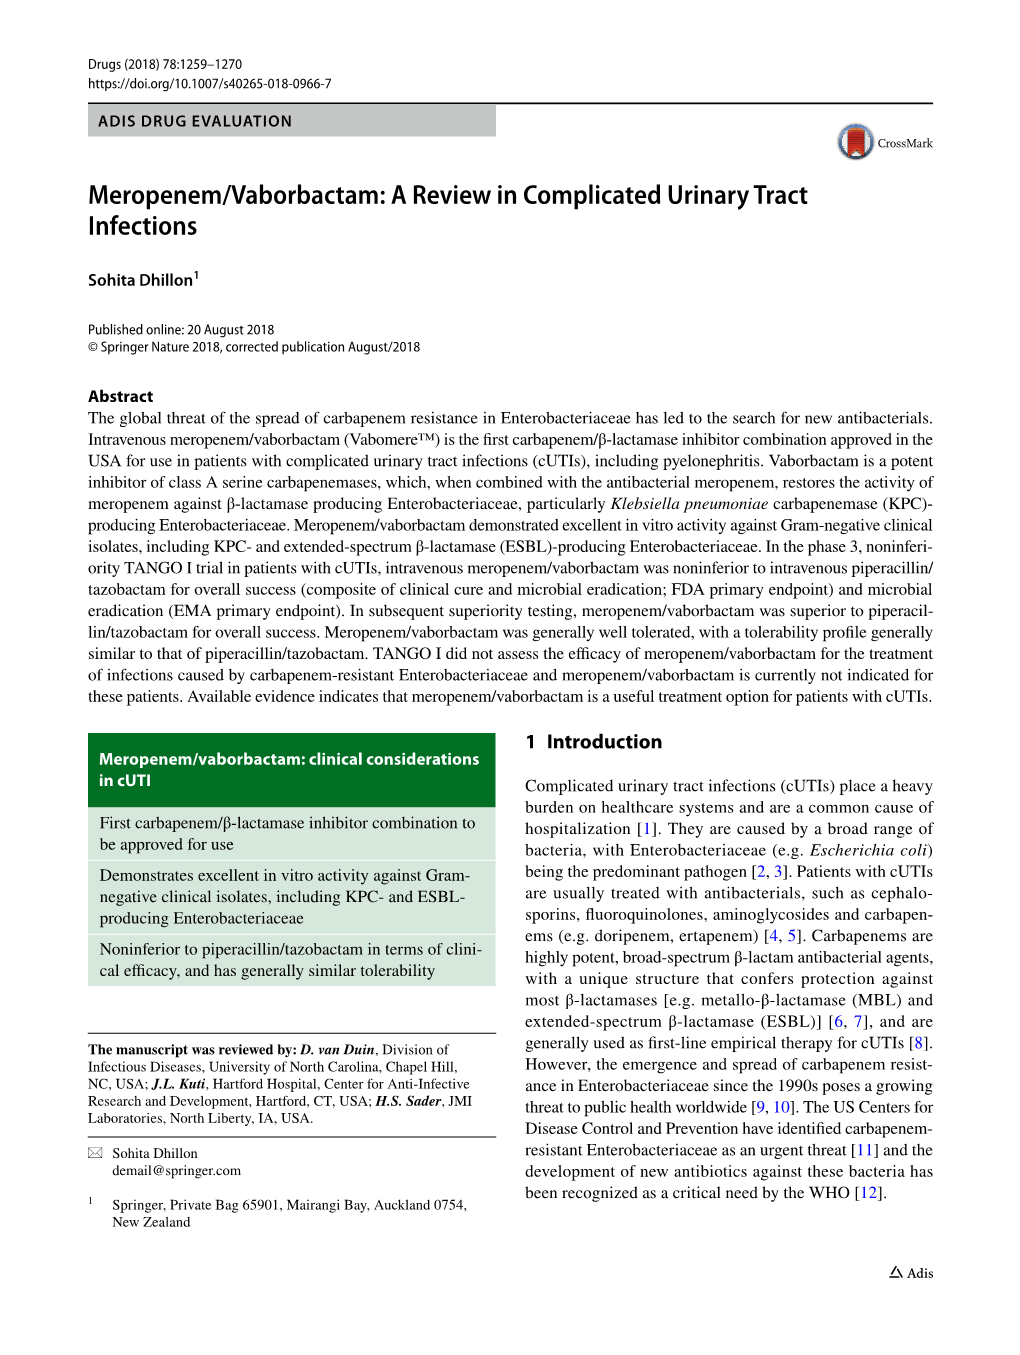 Meropenem/Vaborbactam: a Review in Complicated Urinary Tract Infections